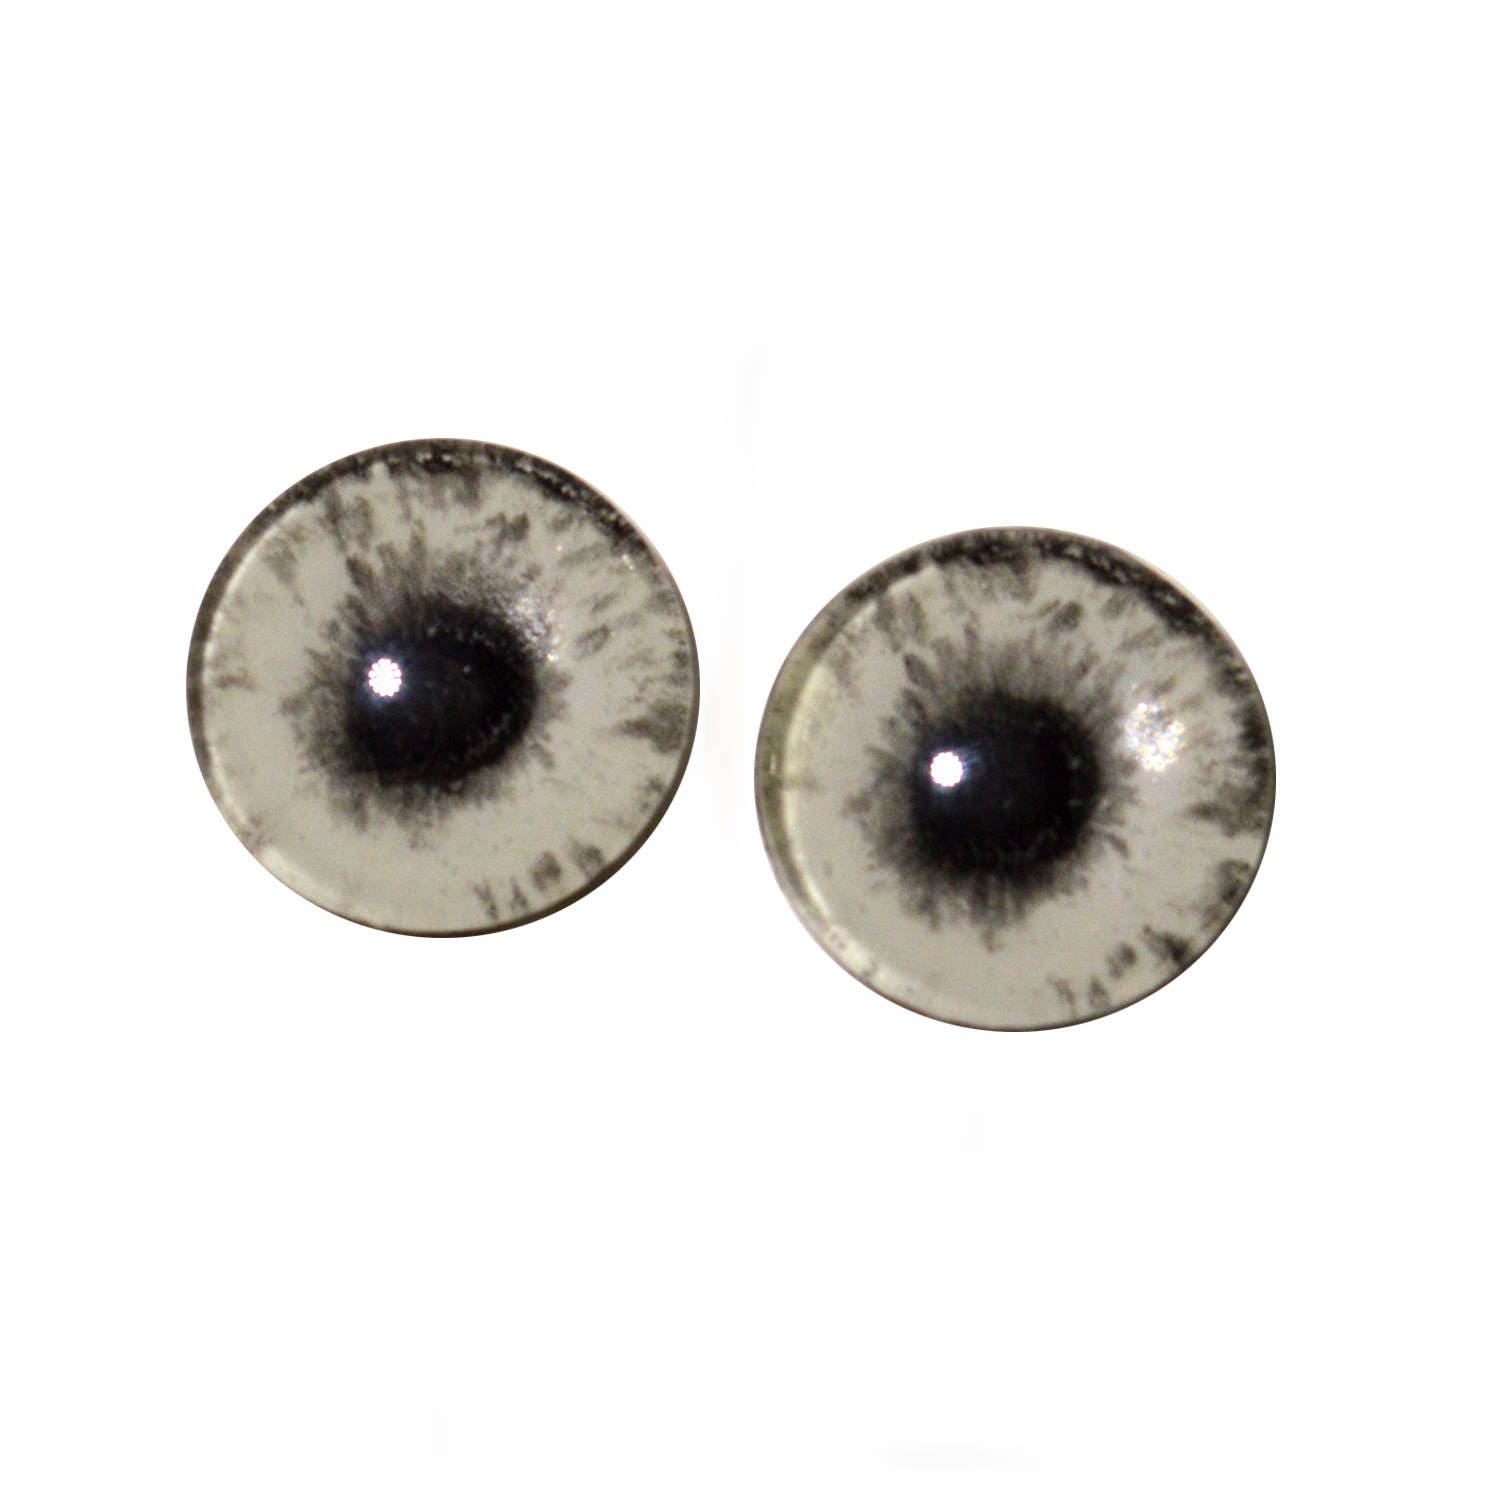 Qeesio 10 Pairs 30mm Glow in the Dark Glass Zombie Eyes Round Dome Glass Cabochons Flatback for DIY Craft Clay Eyes 